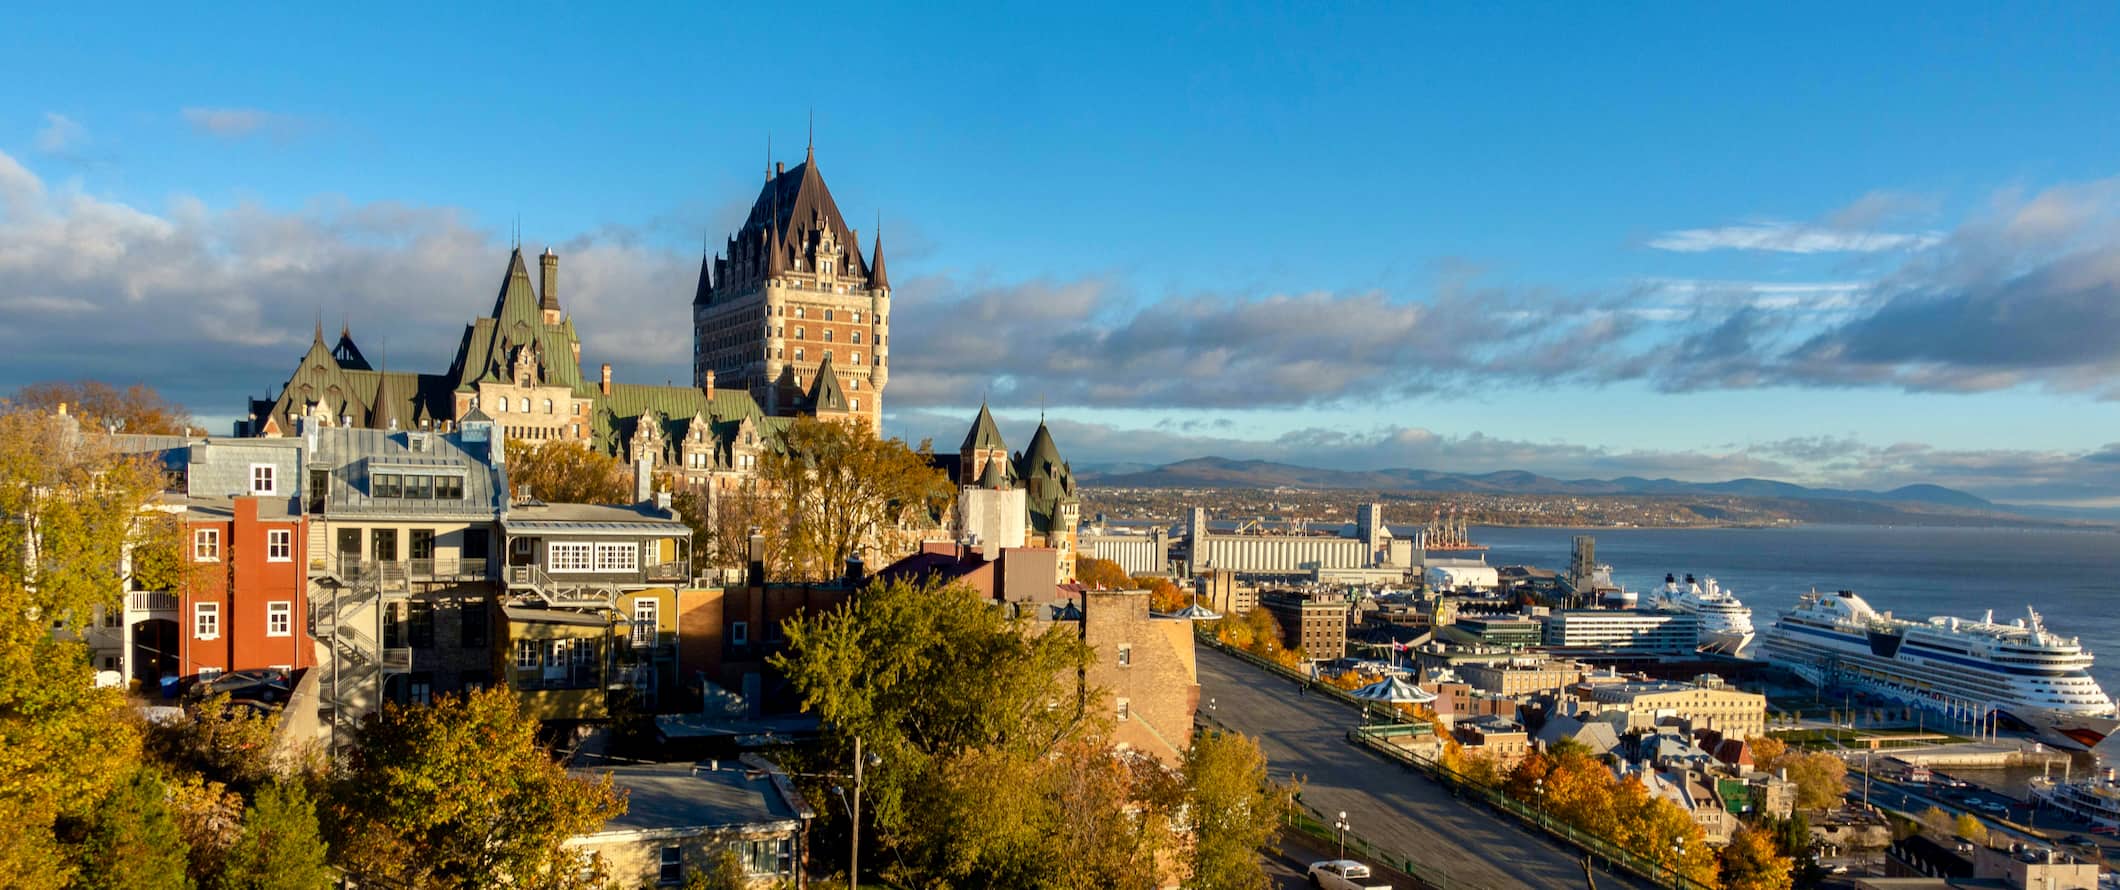 A view over the skyline of Quebec City, Canada with a towering historic chateau in the distance